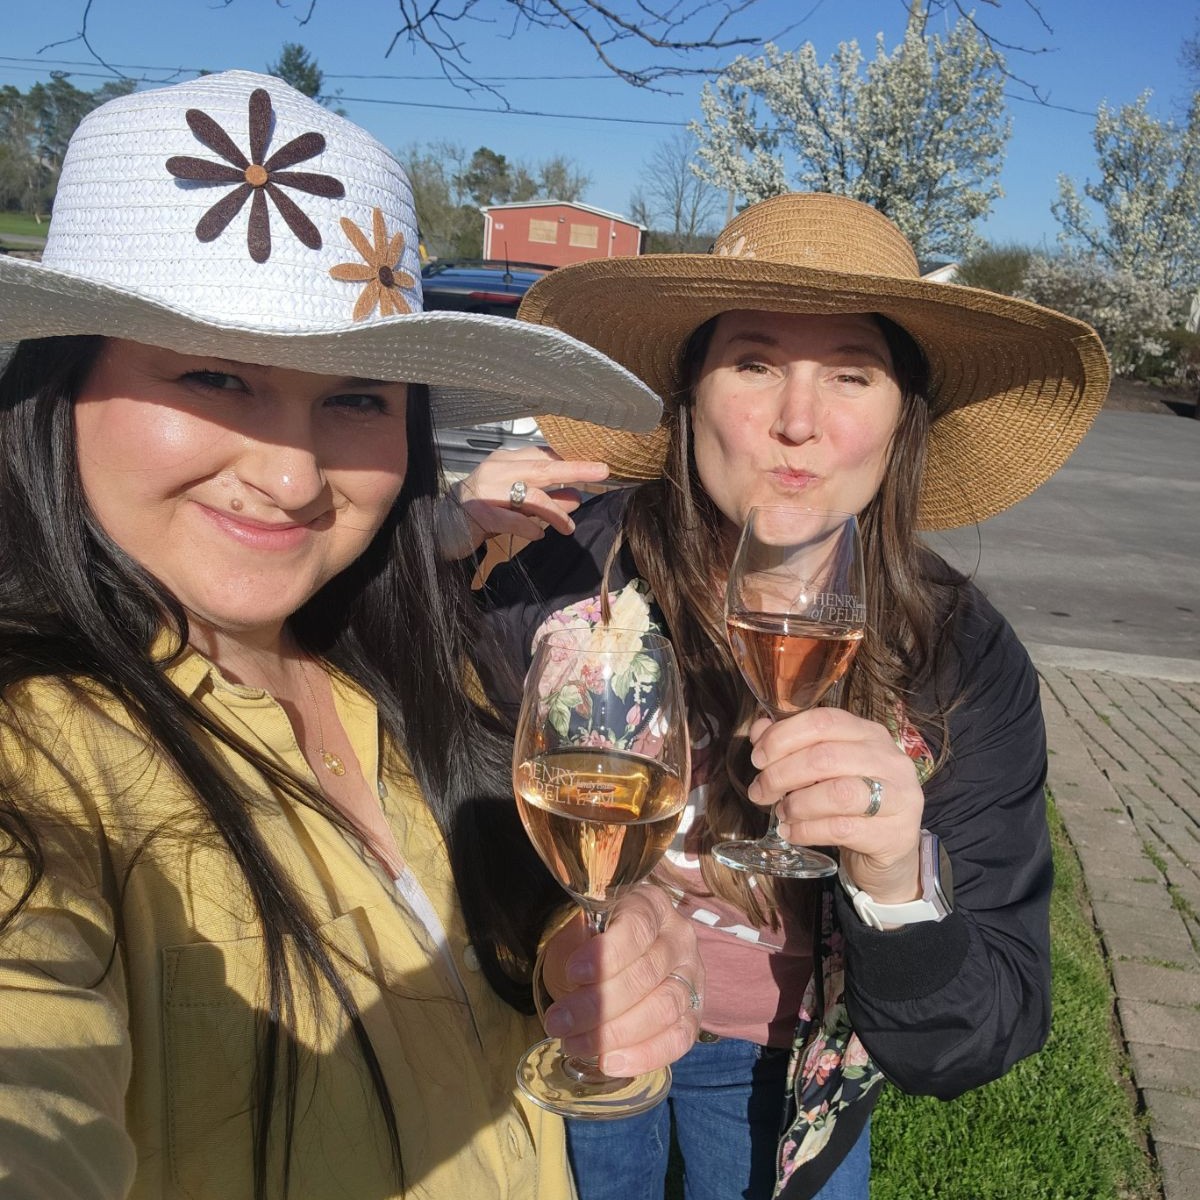 Happy #MothersDay! Treat someone you love to a wine tasting at Henry of Pelham this weekend. All proceeds go toward @niagarachildctr Help Kids Shine Campaign. Learn more about it here: bit.ly/44lKxAb #HenryofPelham #SupportLocal